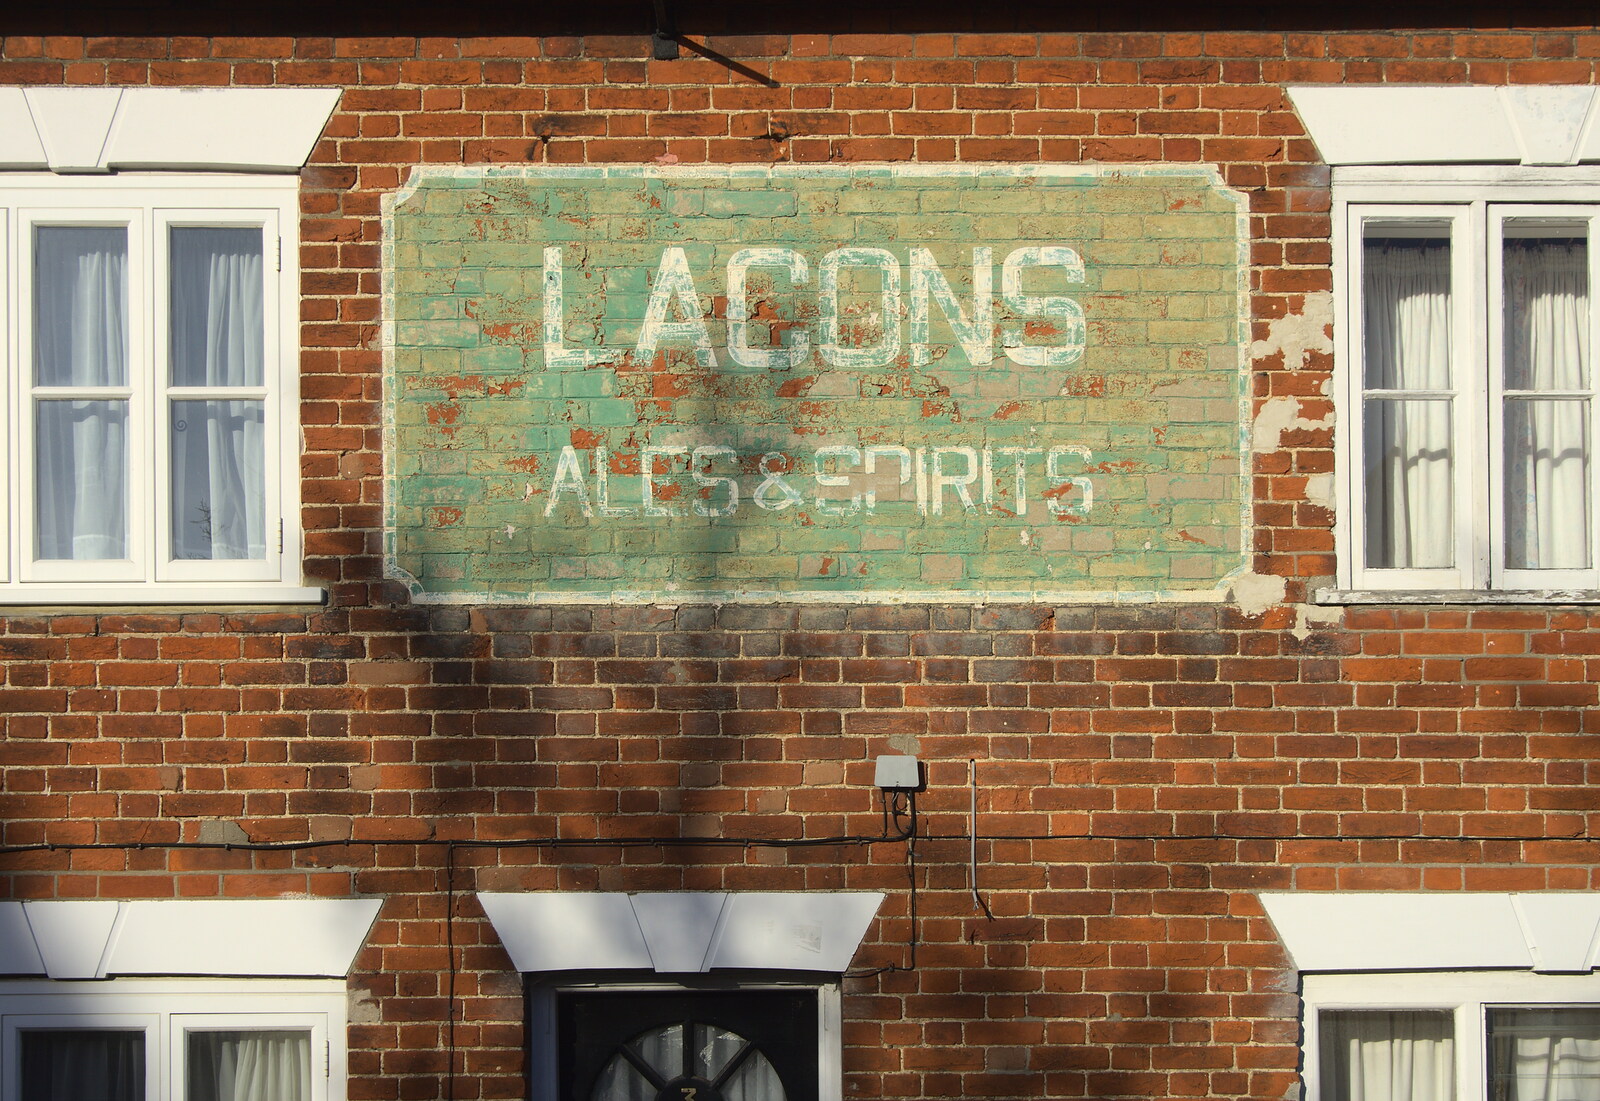 An old Lacon's wall advert from Sis Comes to Visit, Eye, Suffolk - 18th November 2012